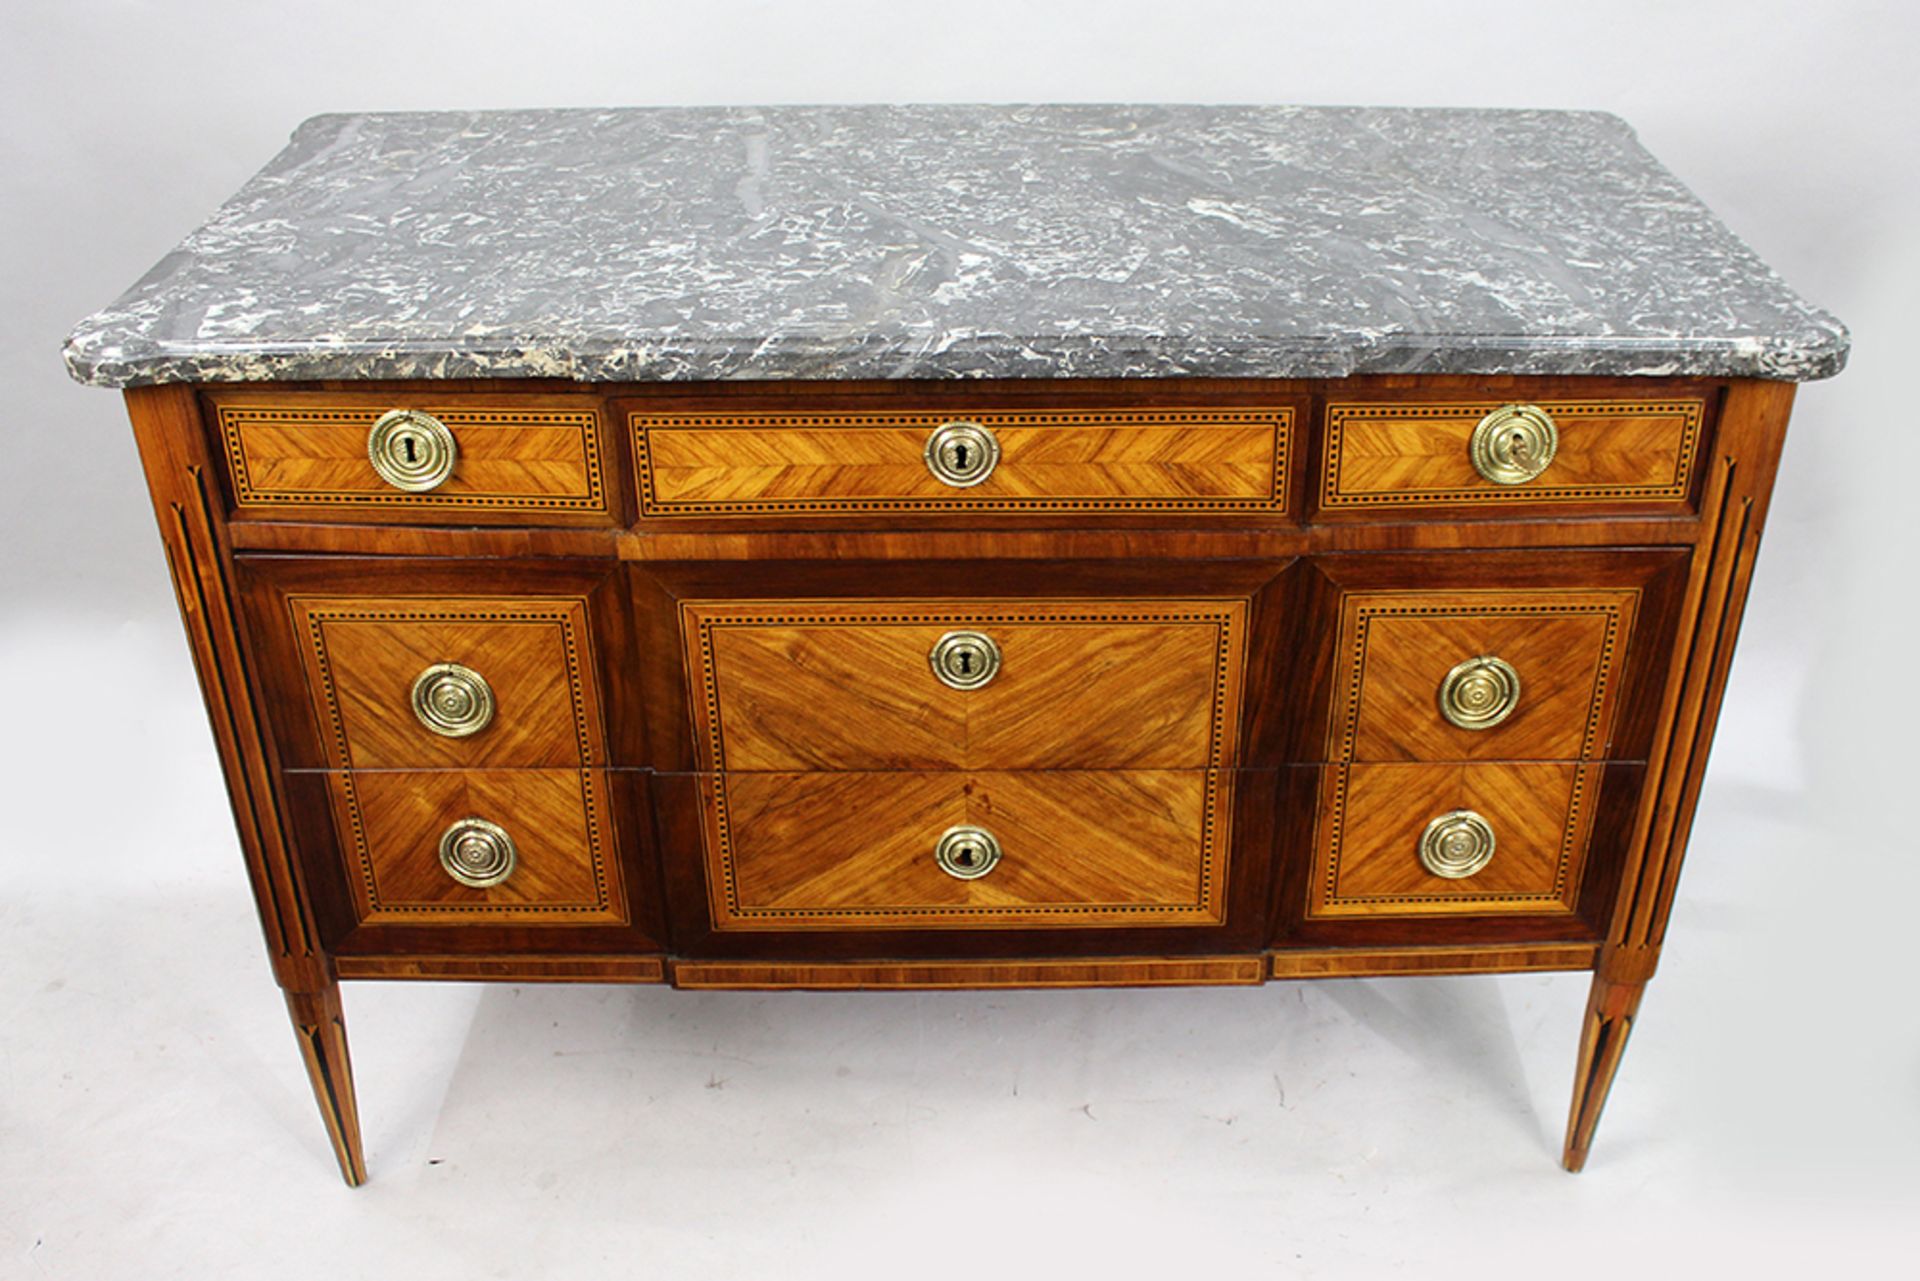 18th c. Inlaid Marble Topped Commode - Image 2 of 14